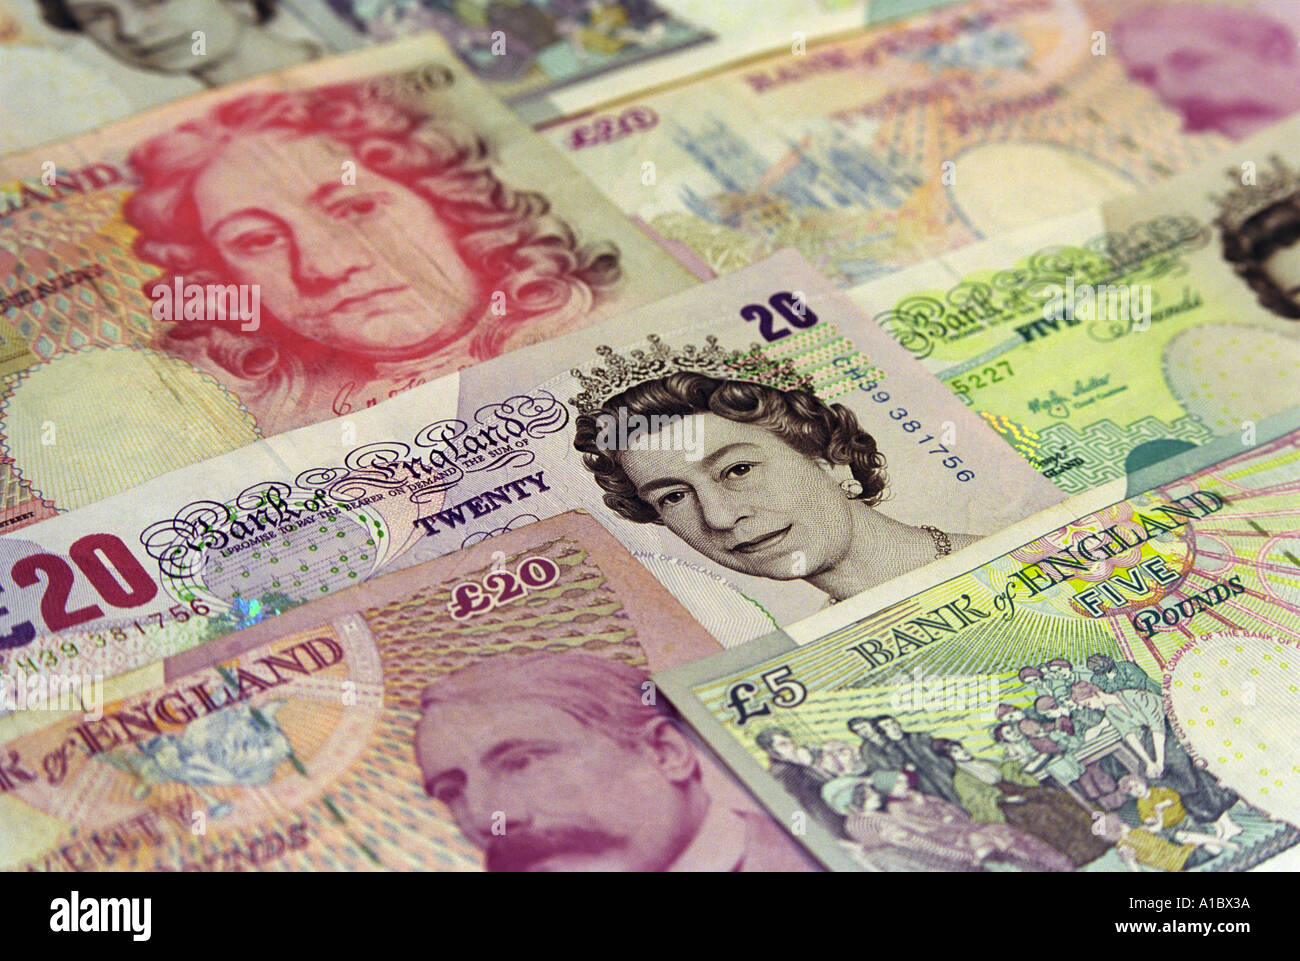 Sterling banknotes neatly laid out Stock Photo